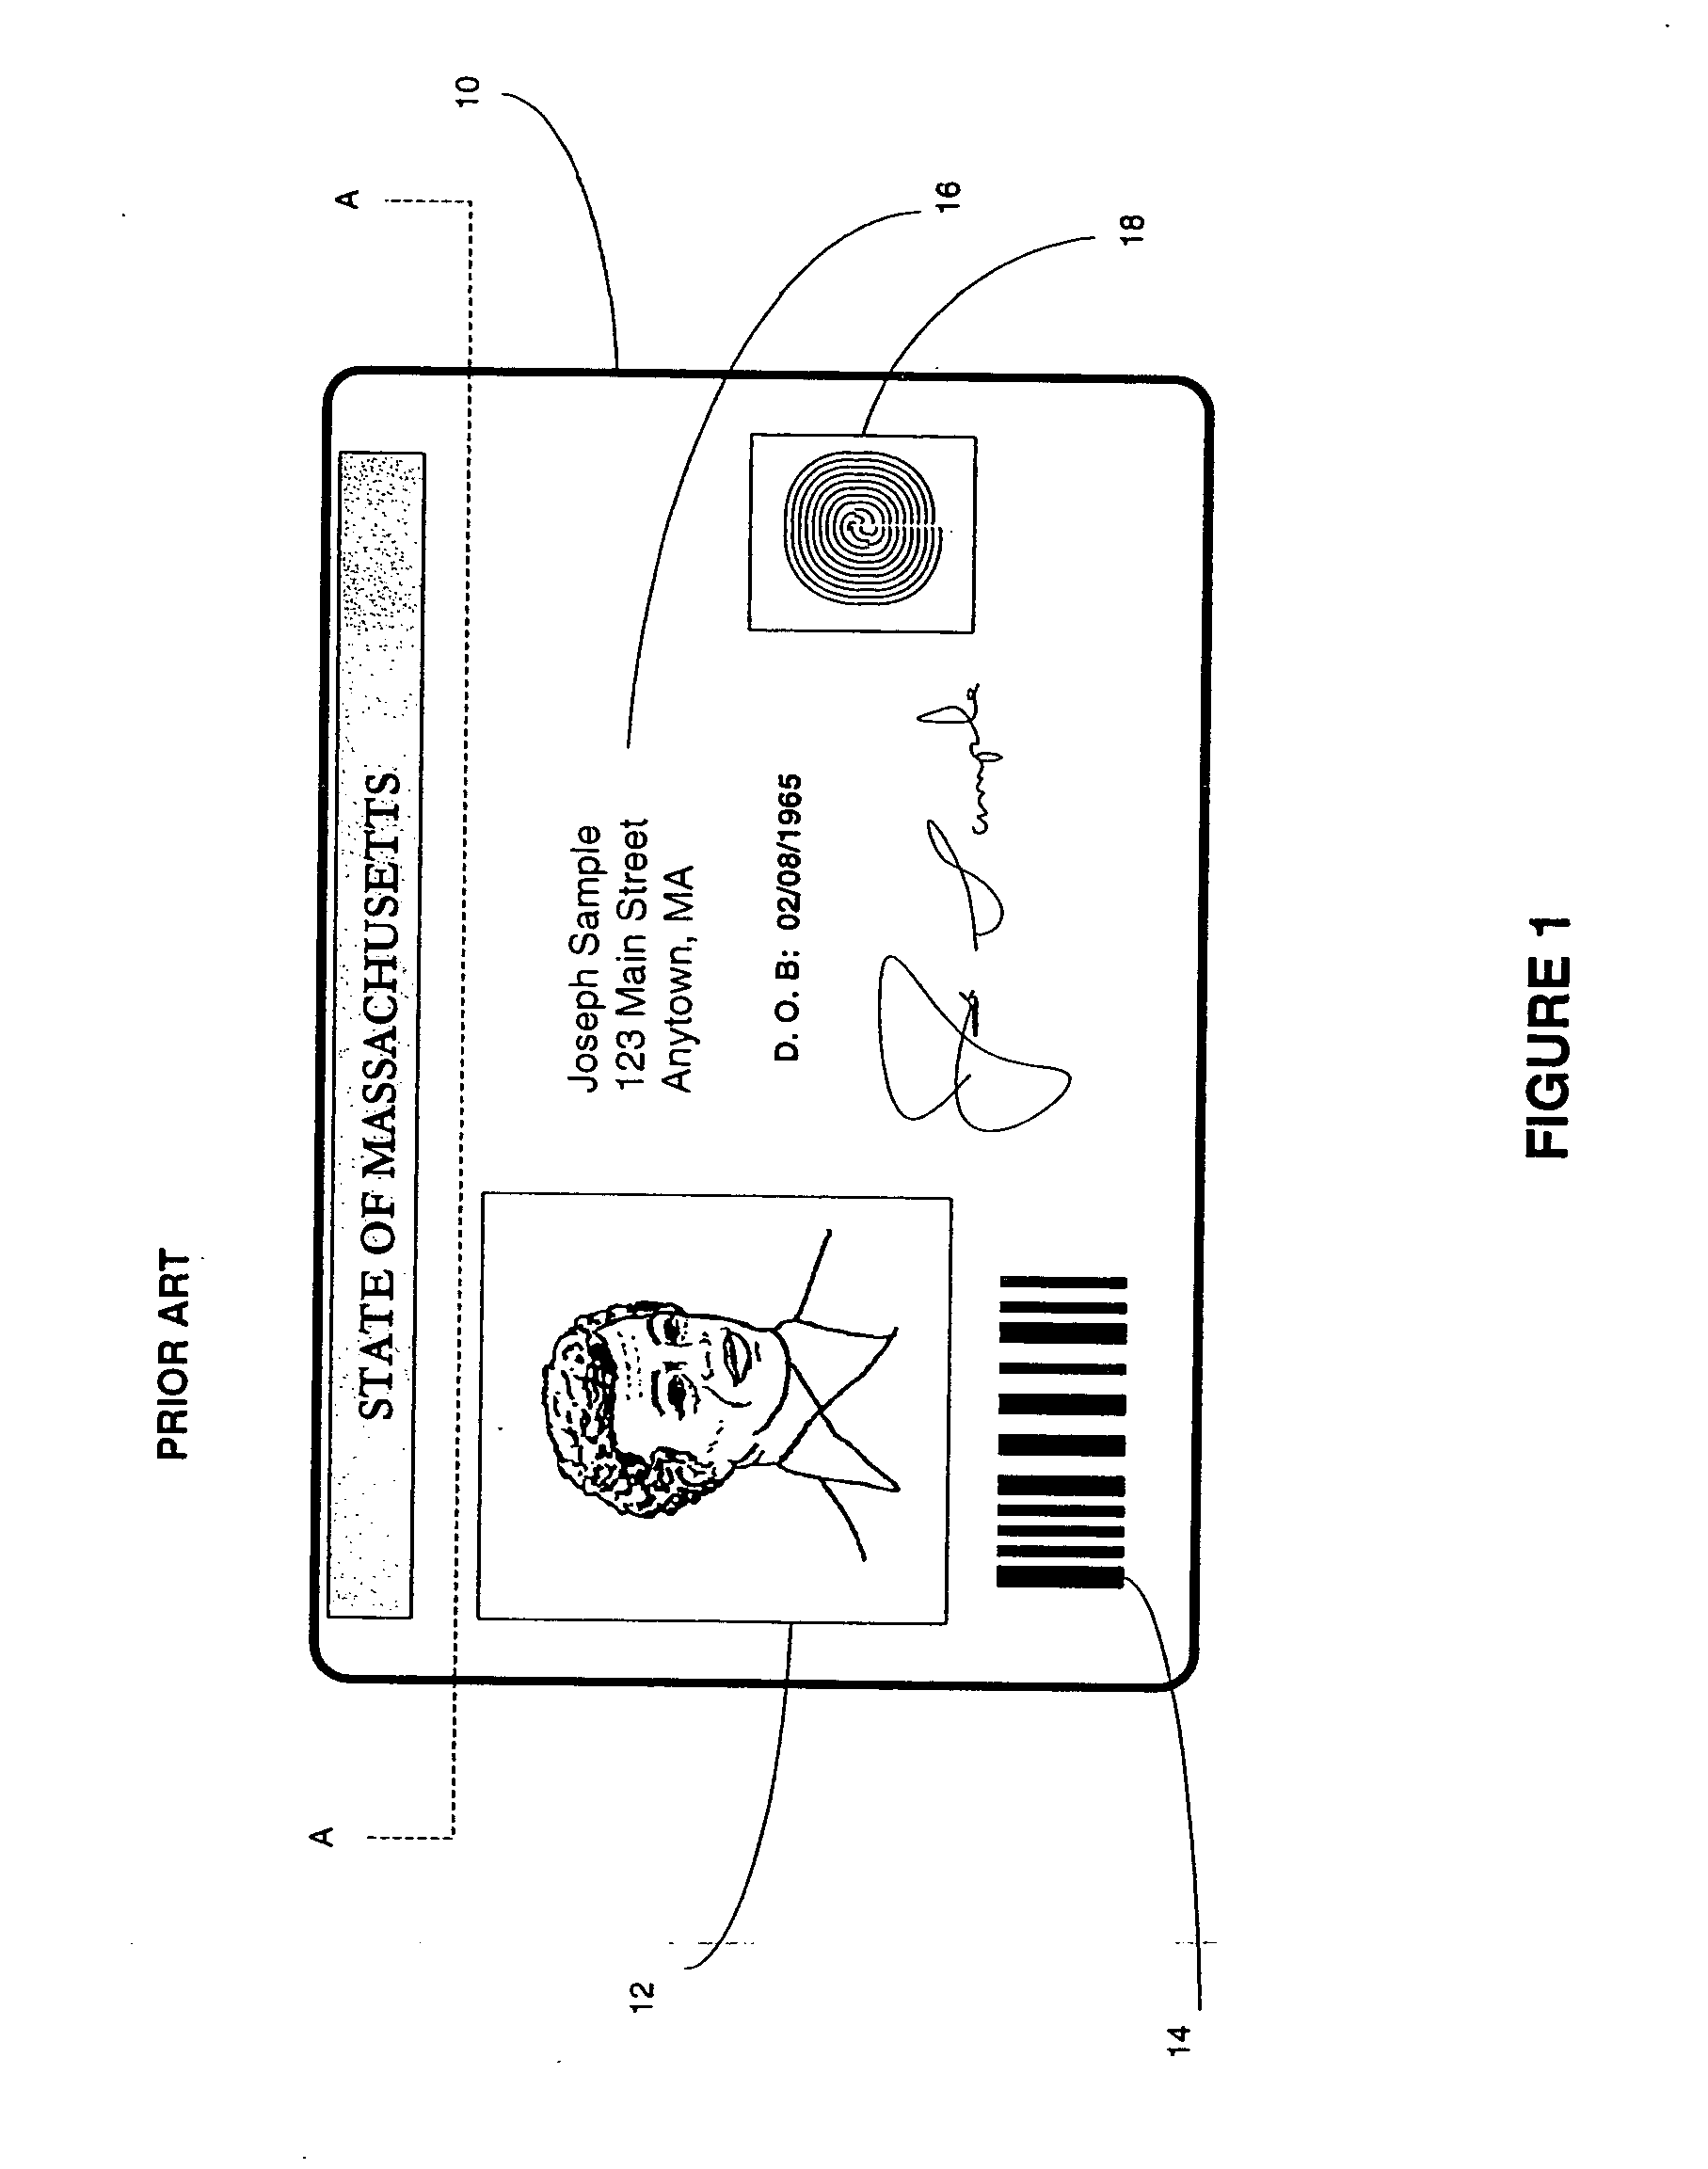 Identification document with three dimensional image of bearer